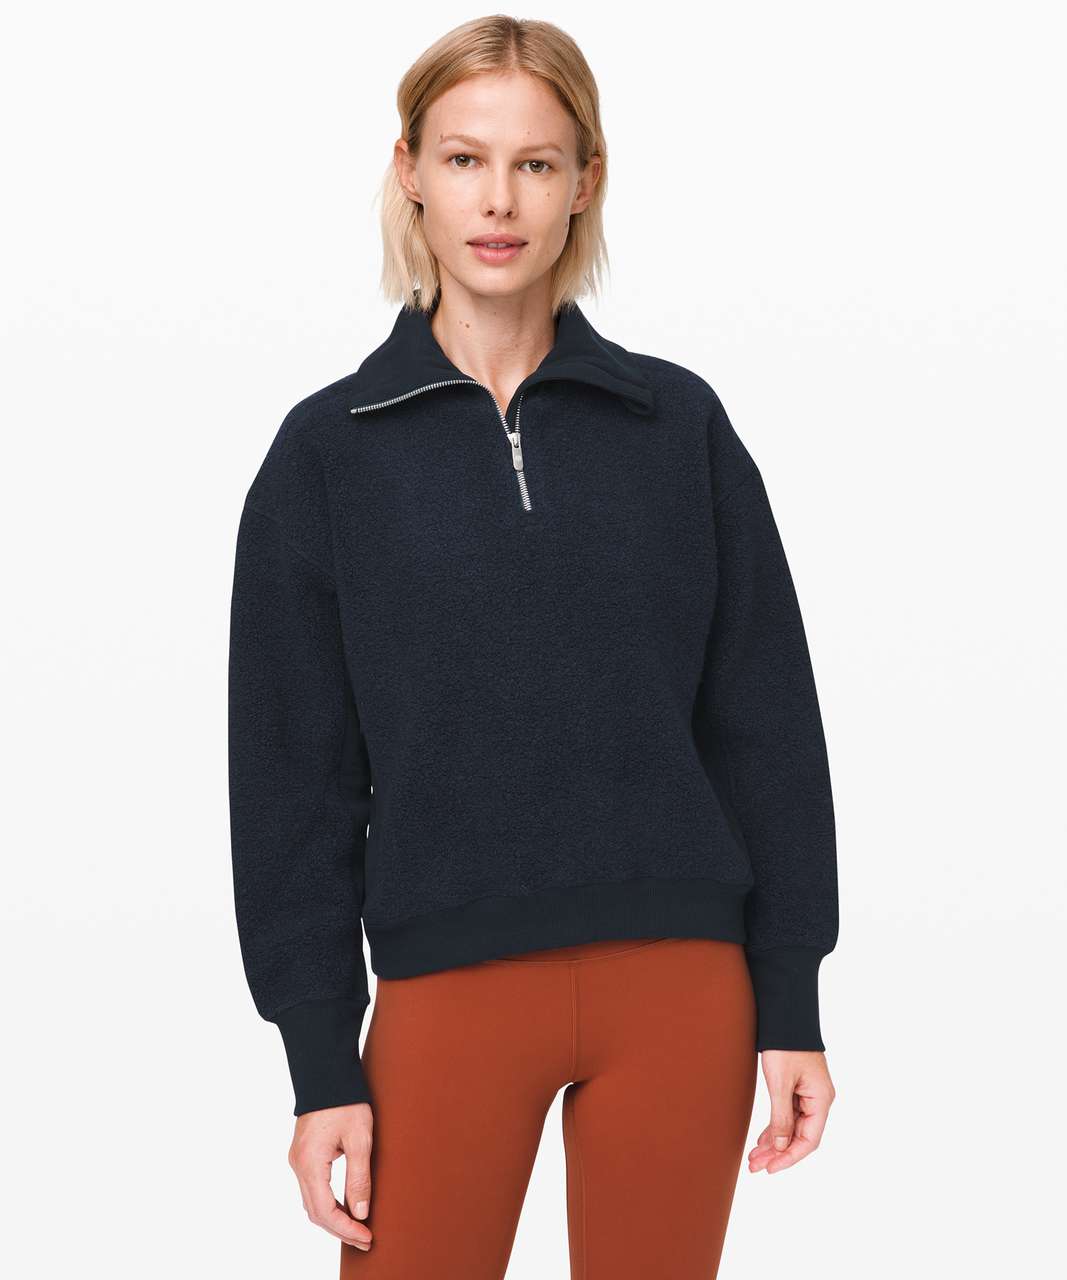 Lululemon Stand Out Sherpa 1/2 Zip - Heathered True Navy